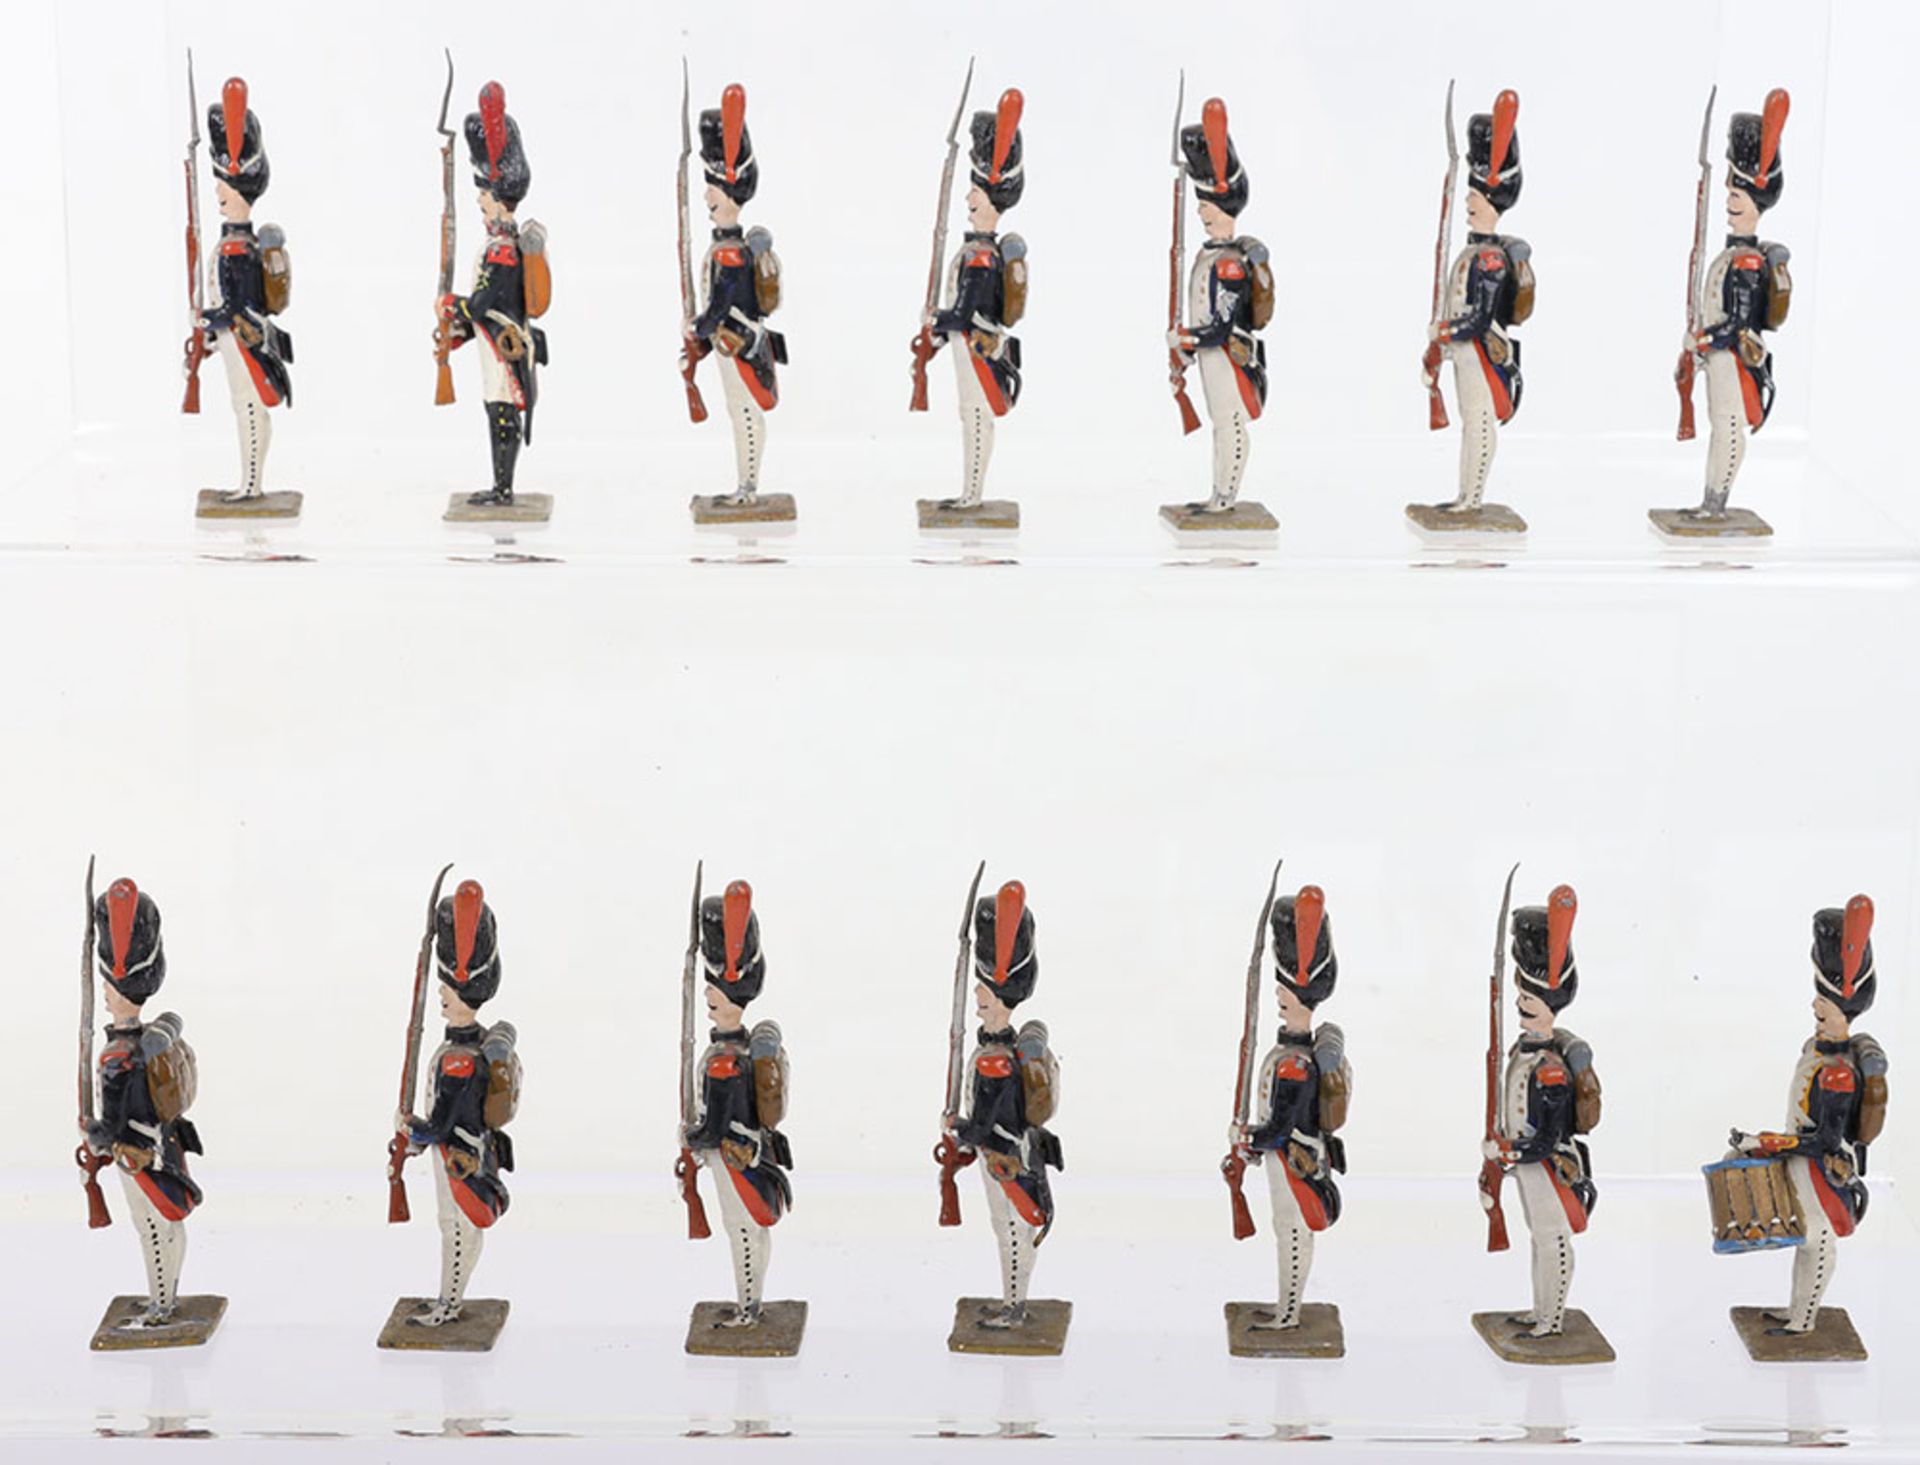 Lucotte Napoleonic First Empire Grenadiers of the Old Guard at salute - Image 2 of 4